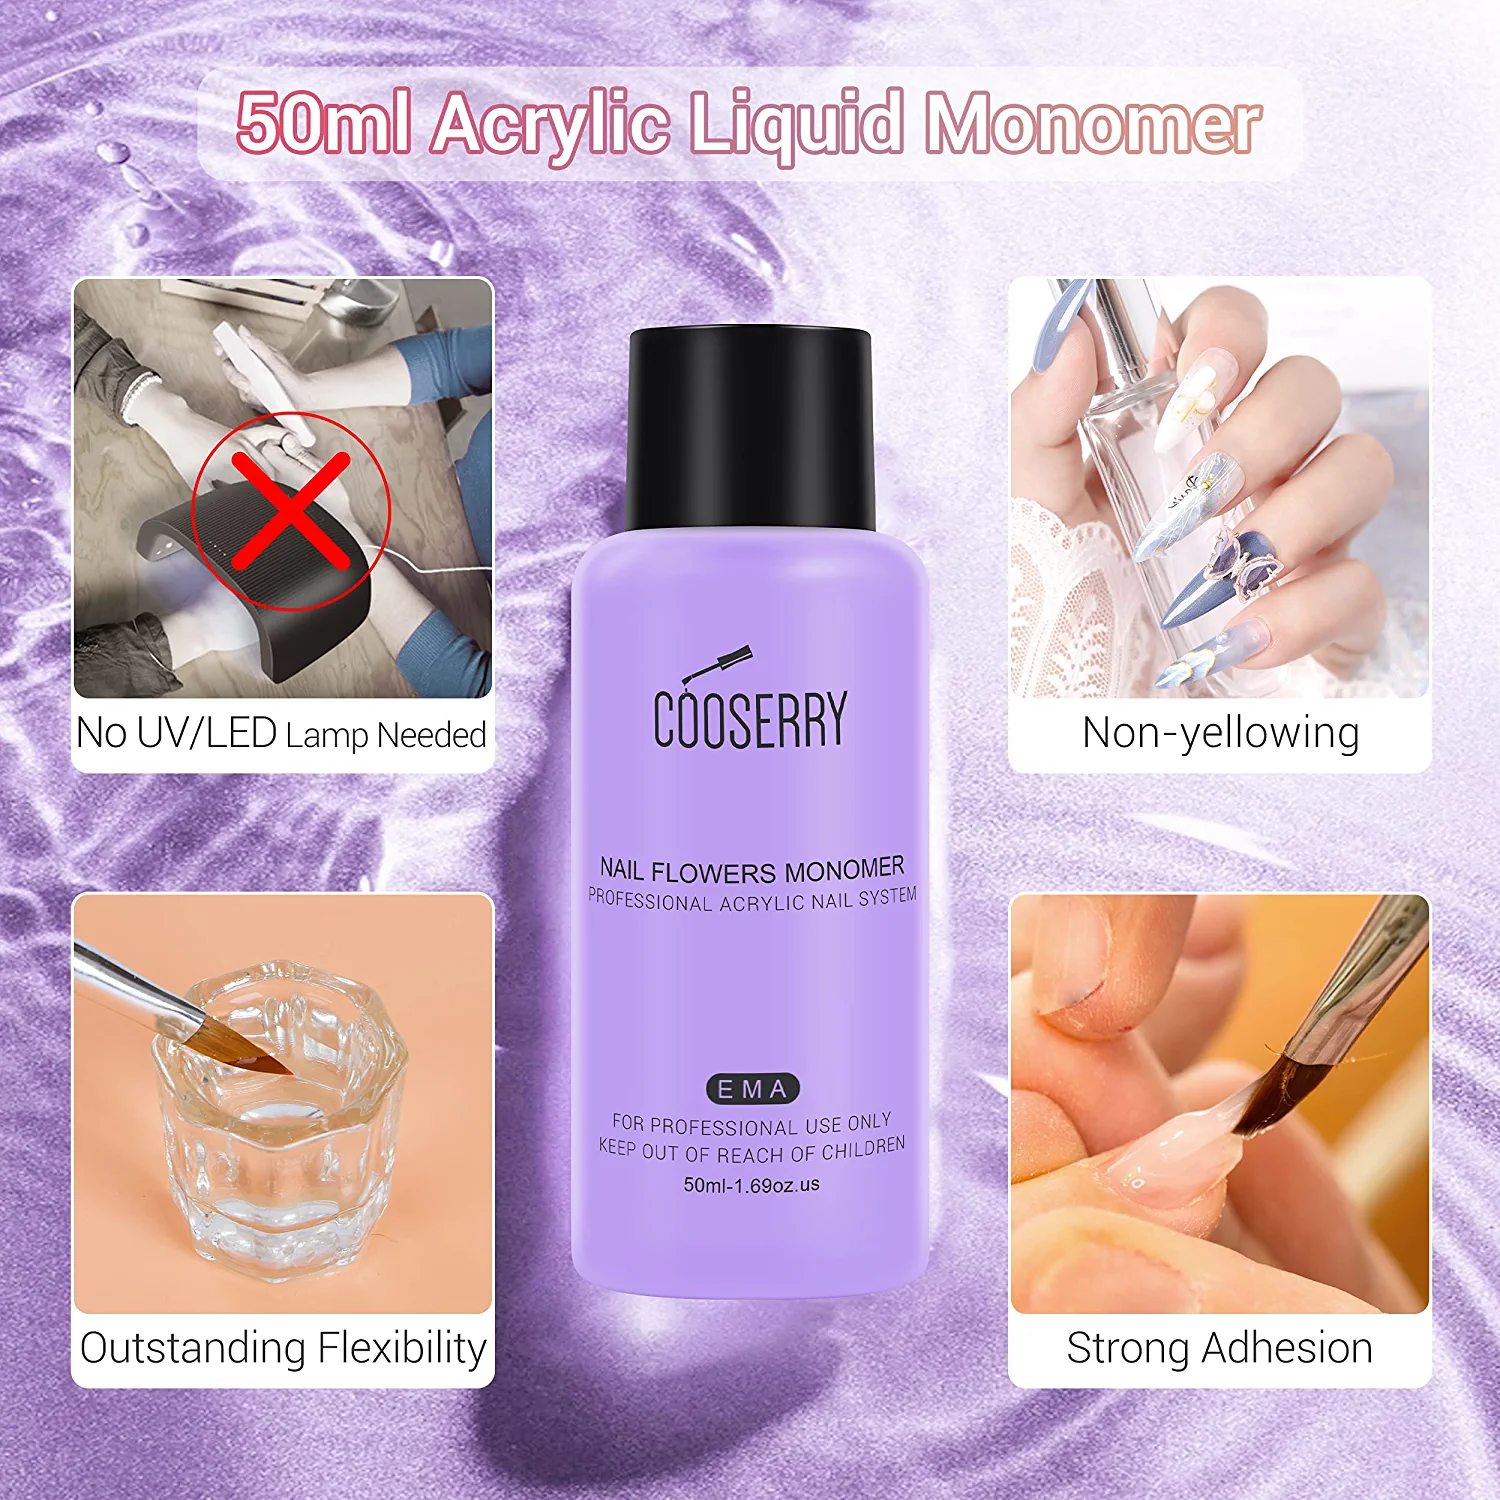 Acrylic Nail Kit - 3 Colors Acrylic Powders and Liquid Monomer Acrylic Set  Nail Kit for Beginners with Everything All-in-One Acrylic Nail Supplies